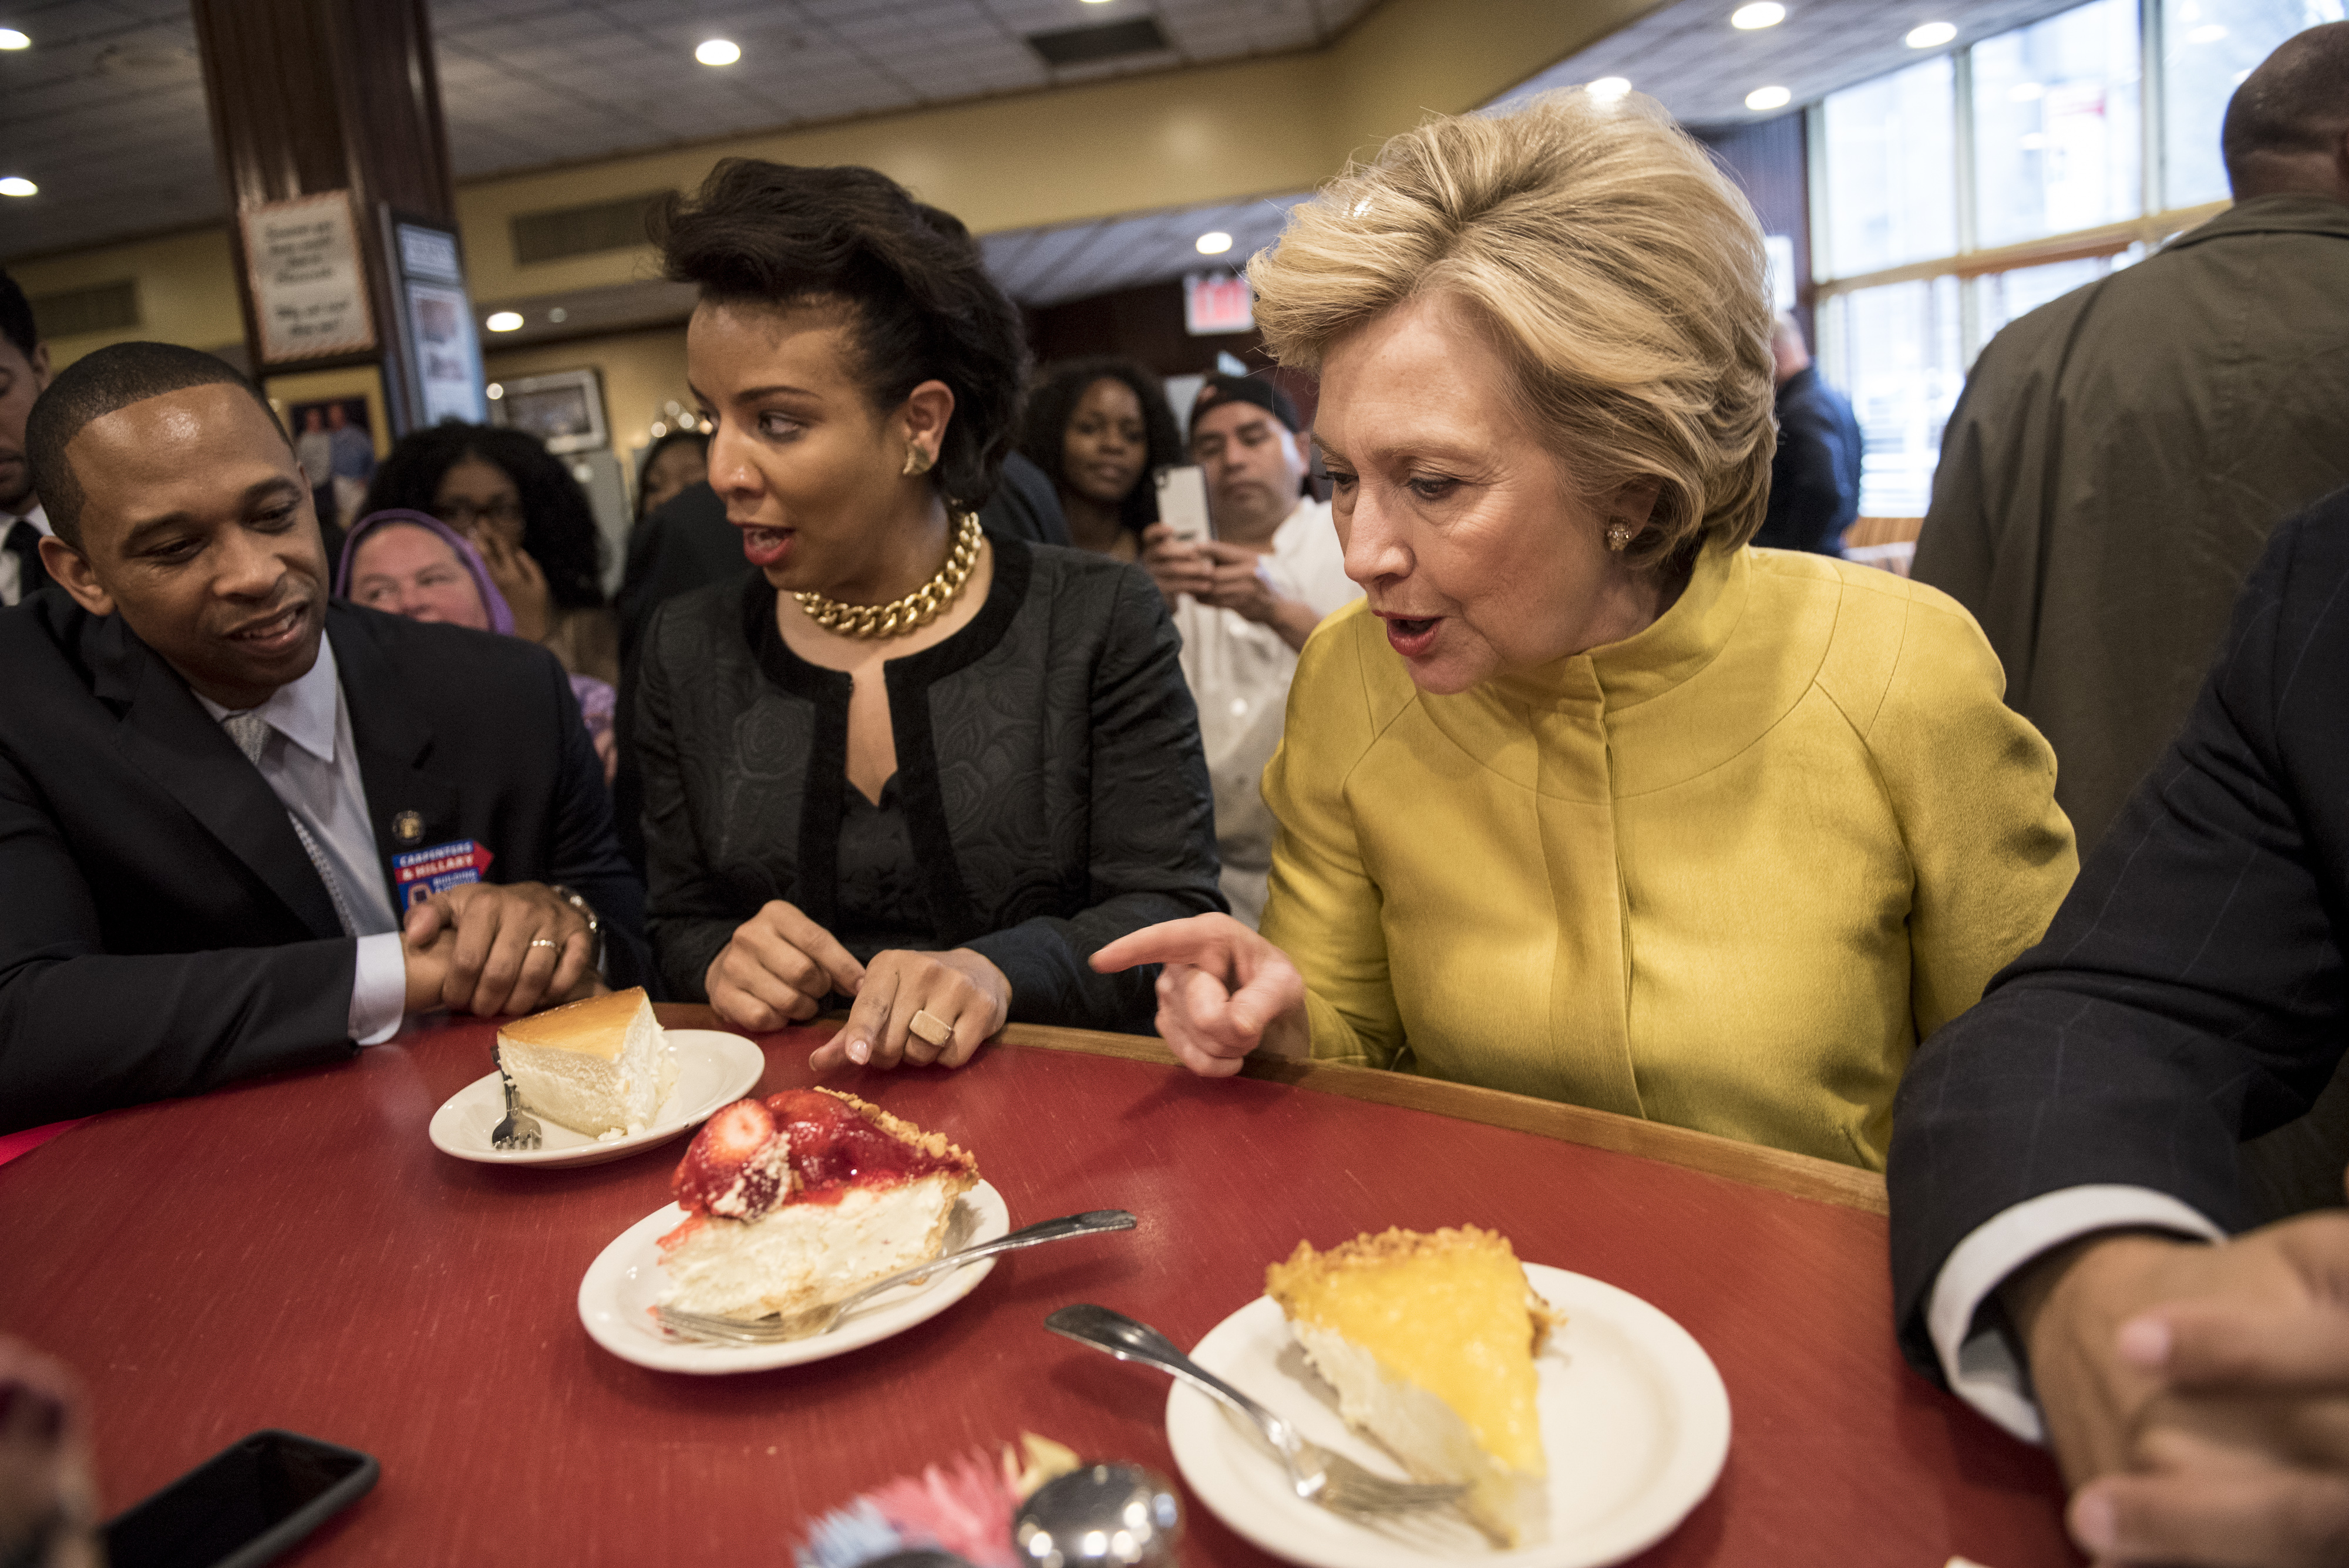 Hillary Clinton speaks with councilwoman Laurie Cumbo at Junior's restaurant while campaigning in Brooklyn, New York City on April 9, 2016. (Andrew Renneisen—Getty Images)